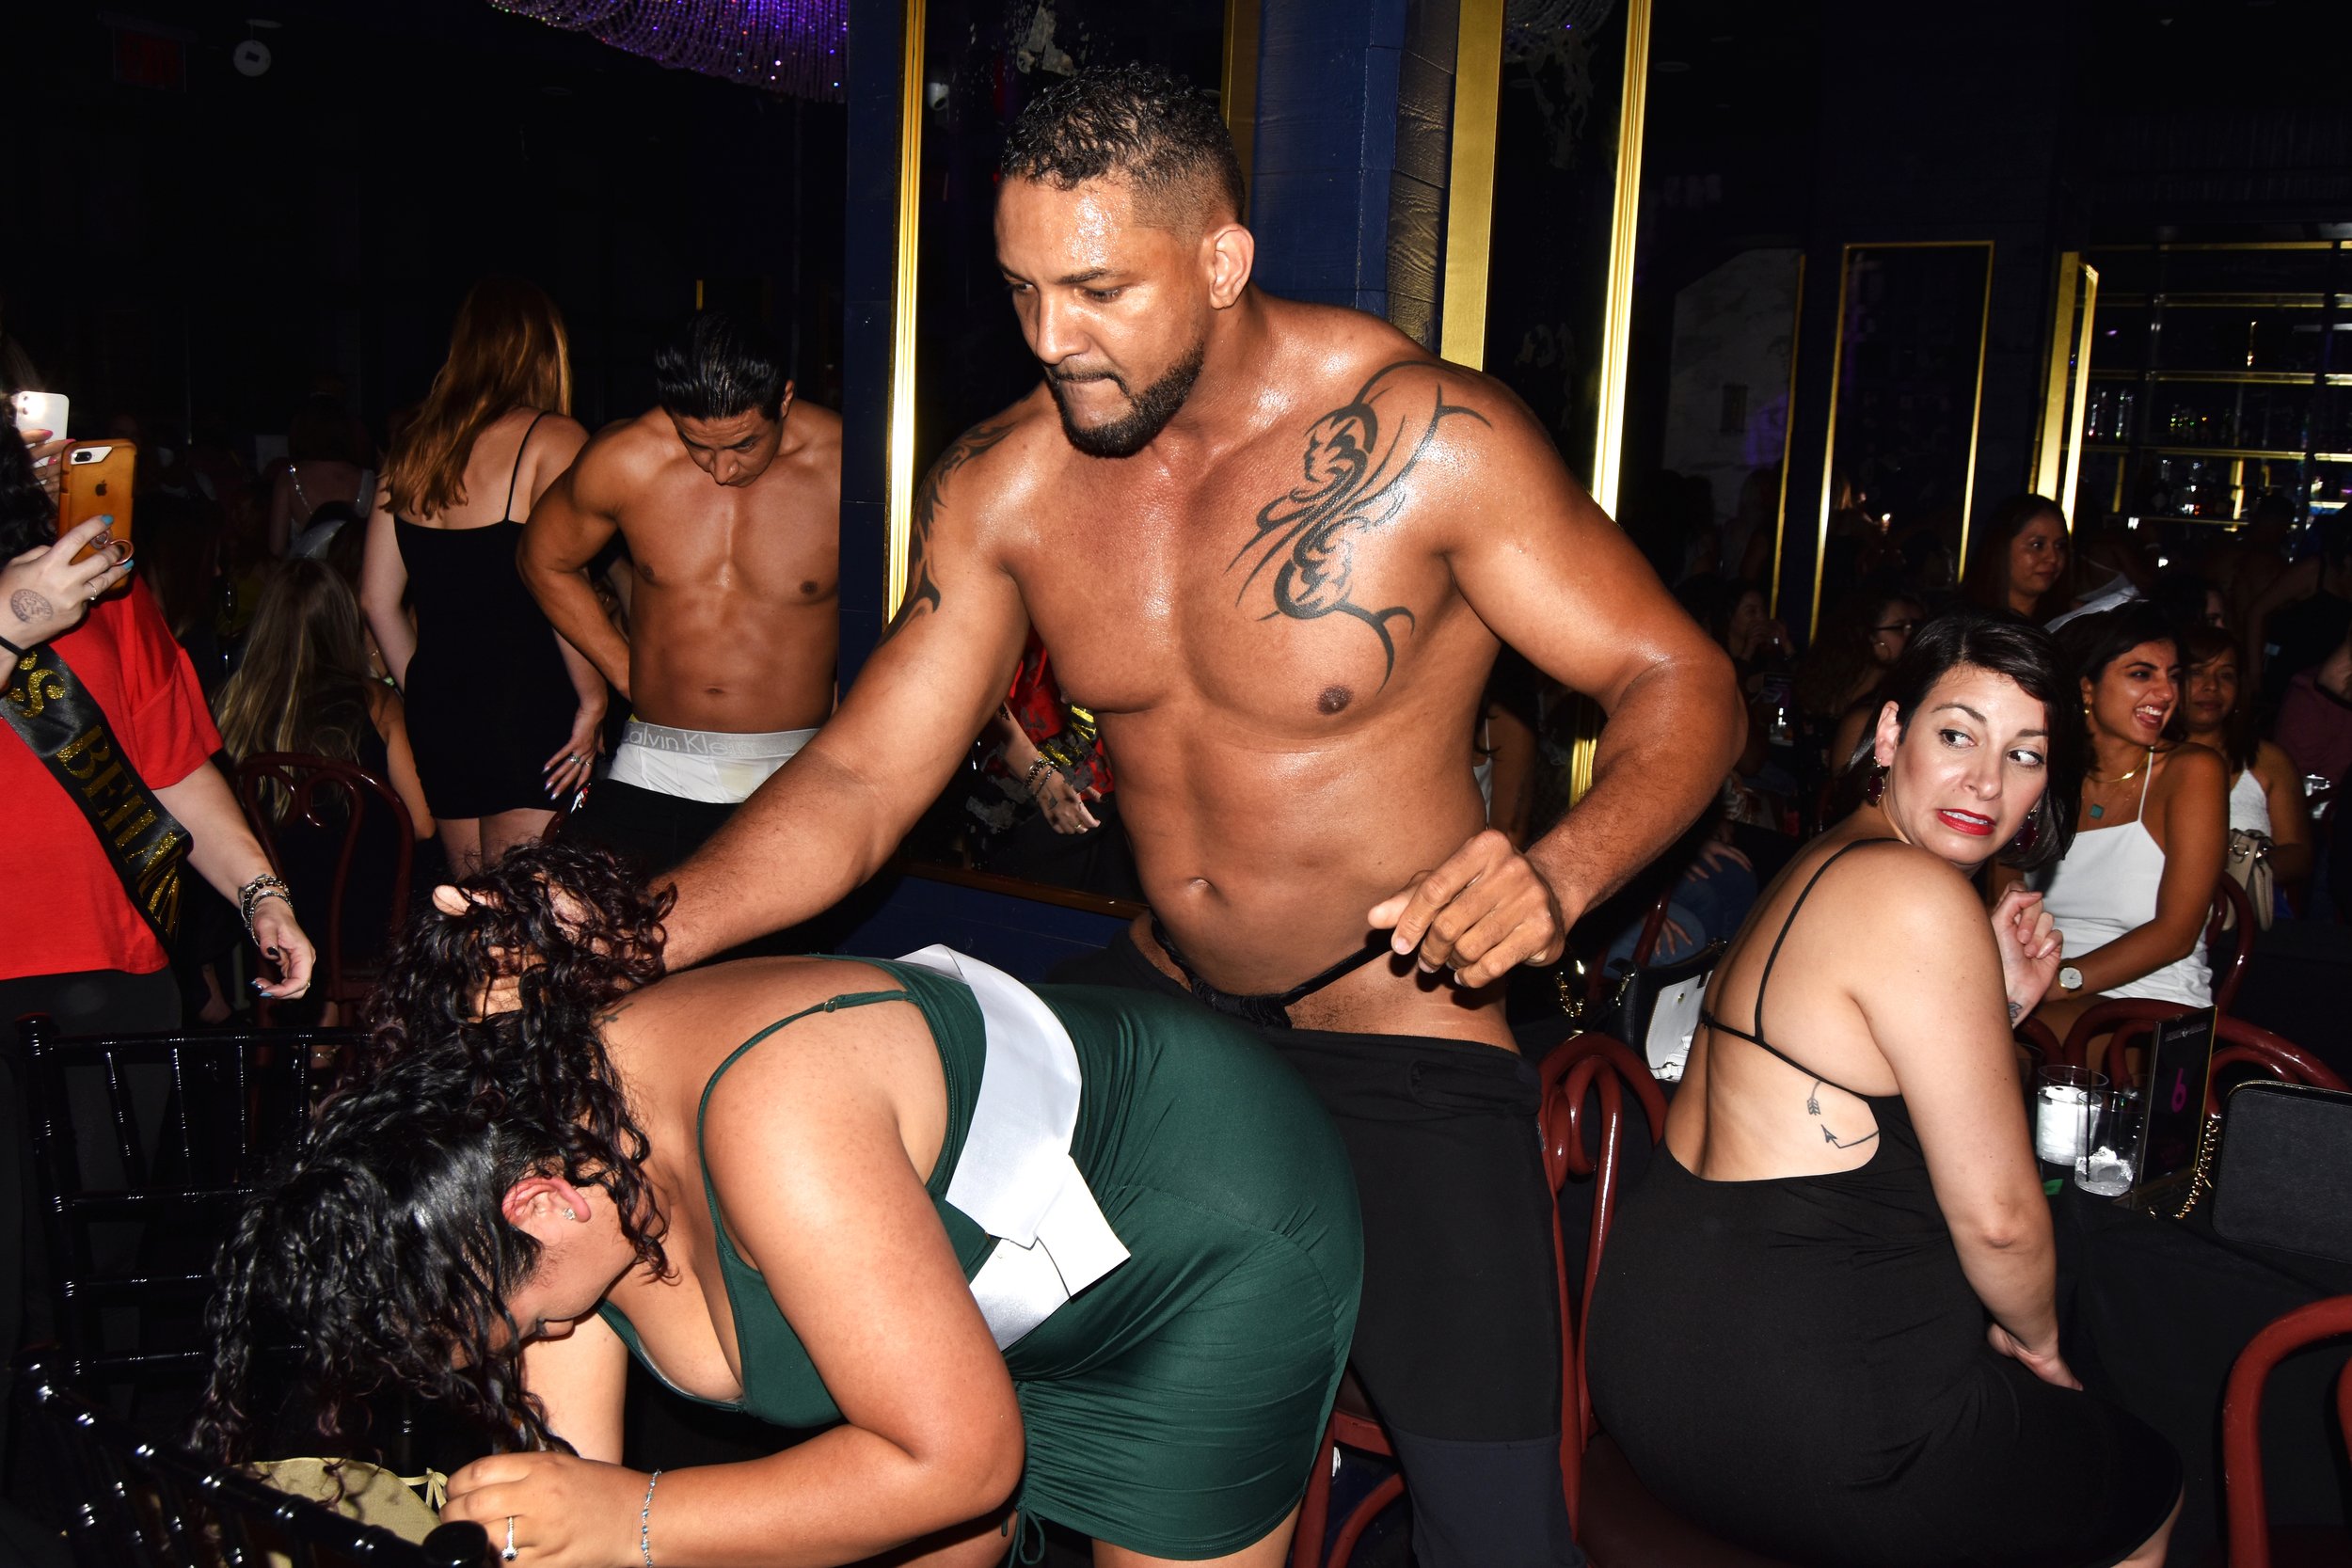 The Frantic Fun of Hunk-O-Mania, male strippers for women — Nina Roberts